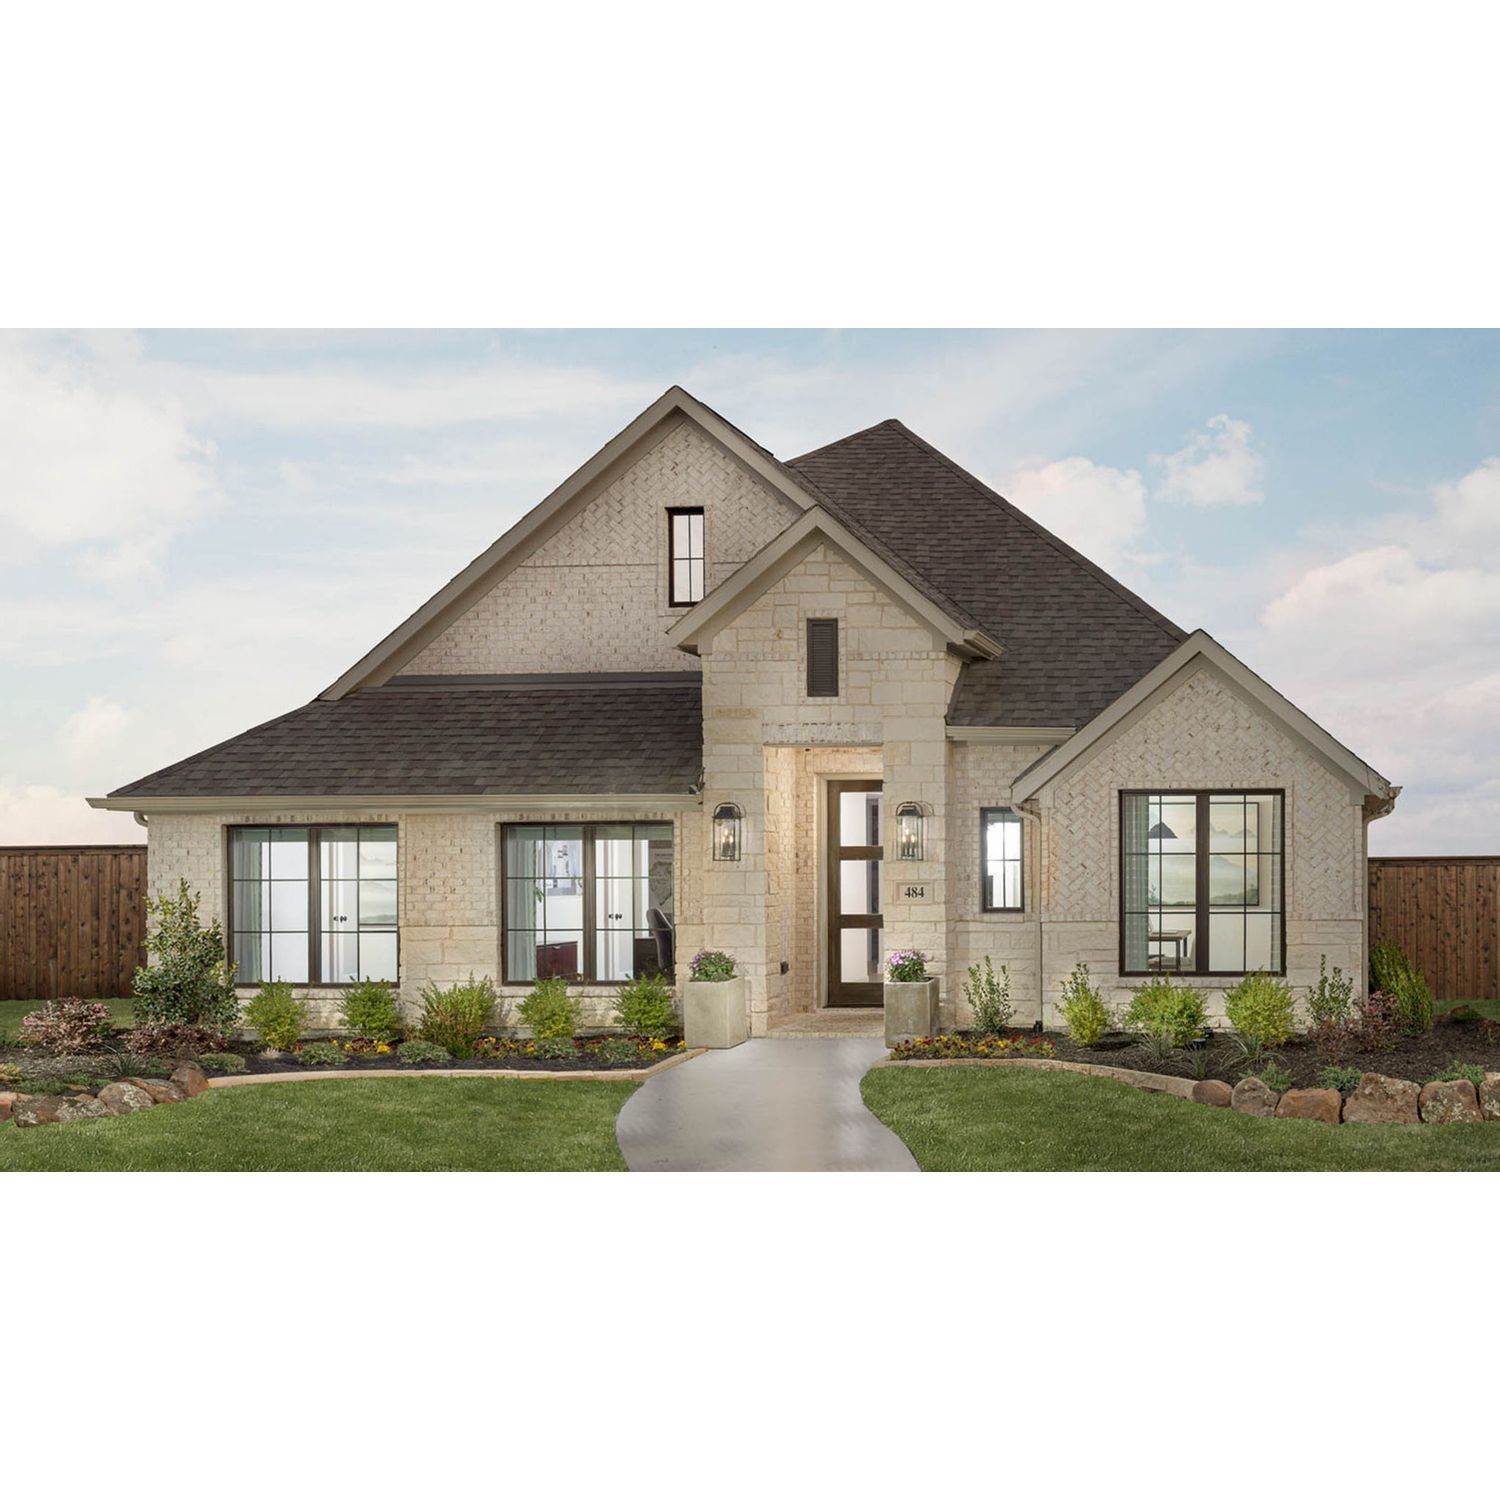 3. Reunion 50' building at 113 Shoreview Drive, Rhome, TX 76078